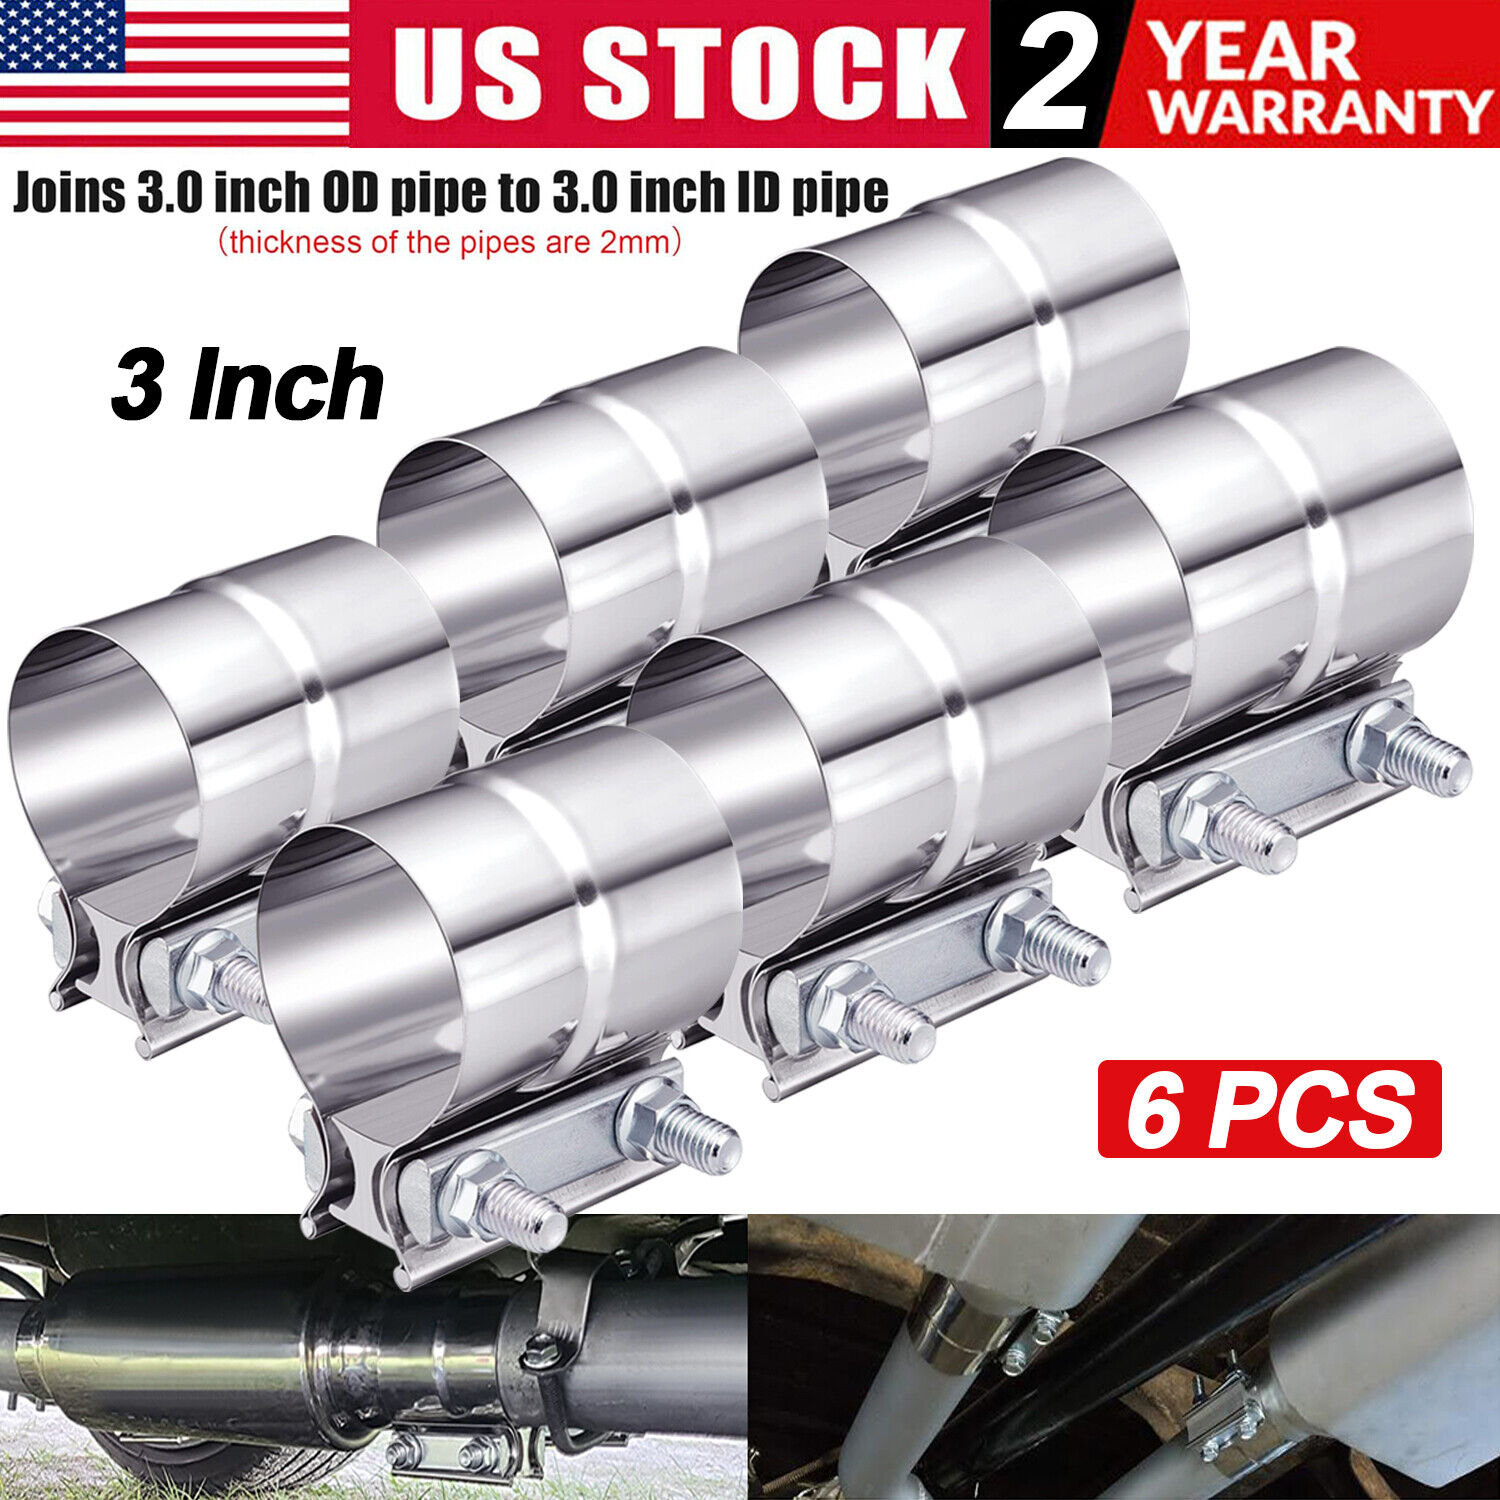 6 x 3inch T-304 Stainless Steel Joint Band Exhaust Clamp for Butt Sleeve Coupler